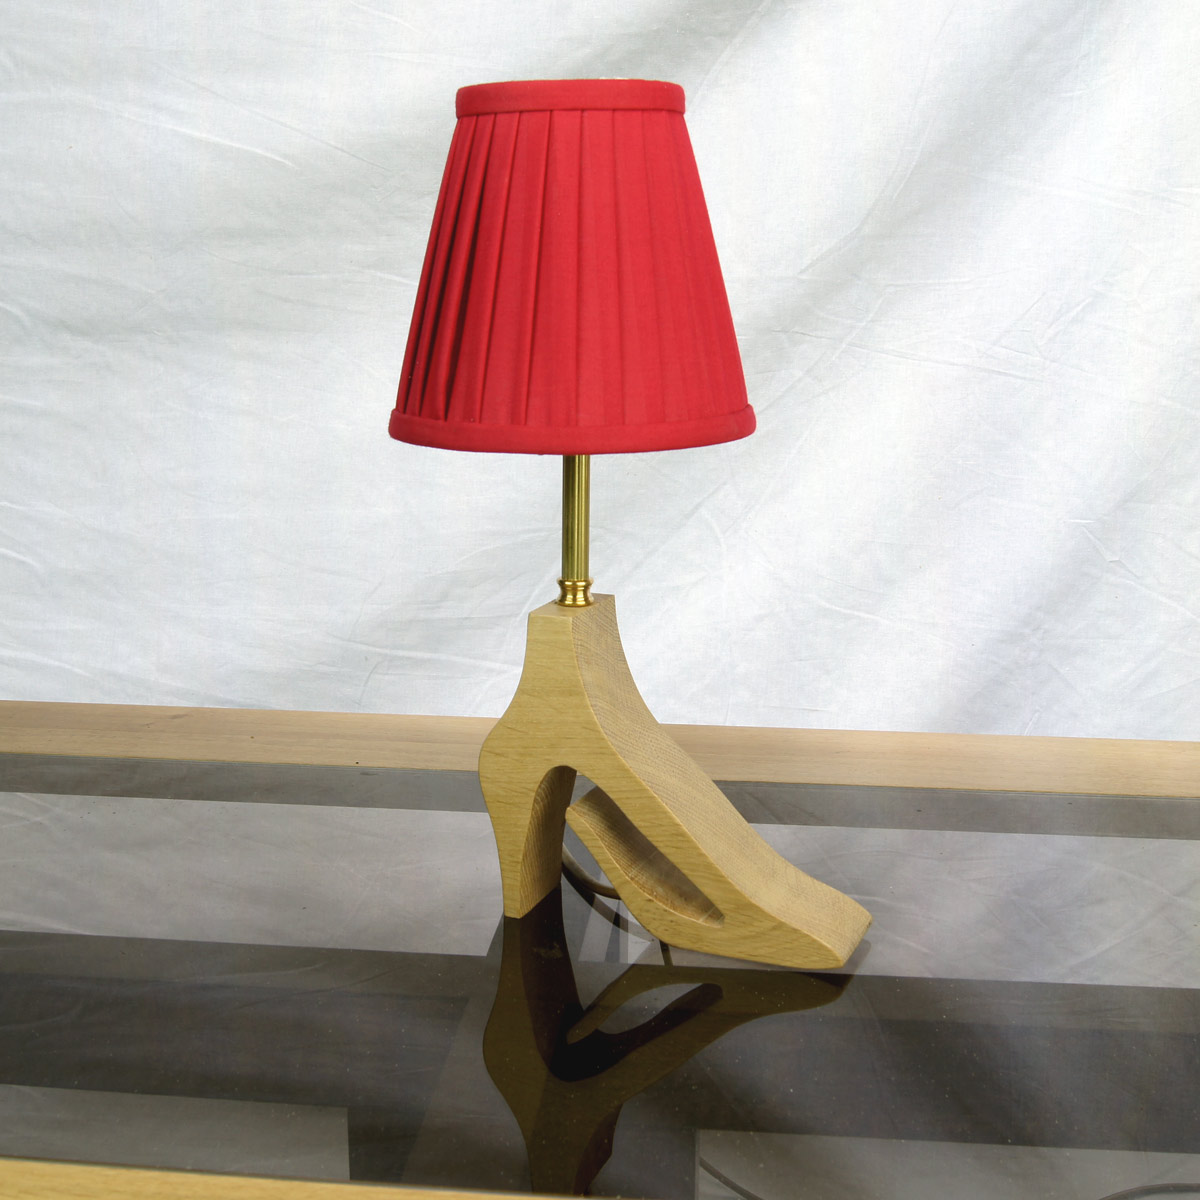 Lady's shoe table lamp